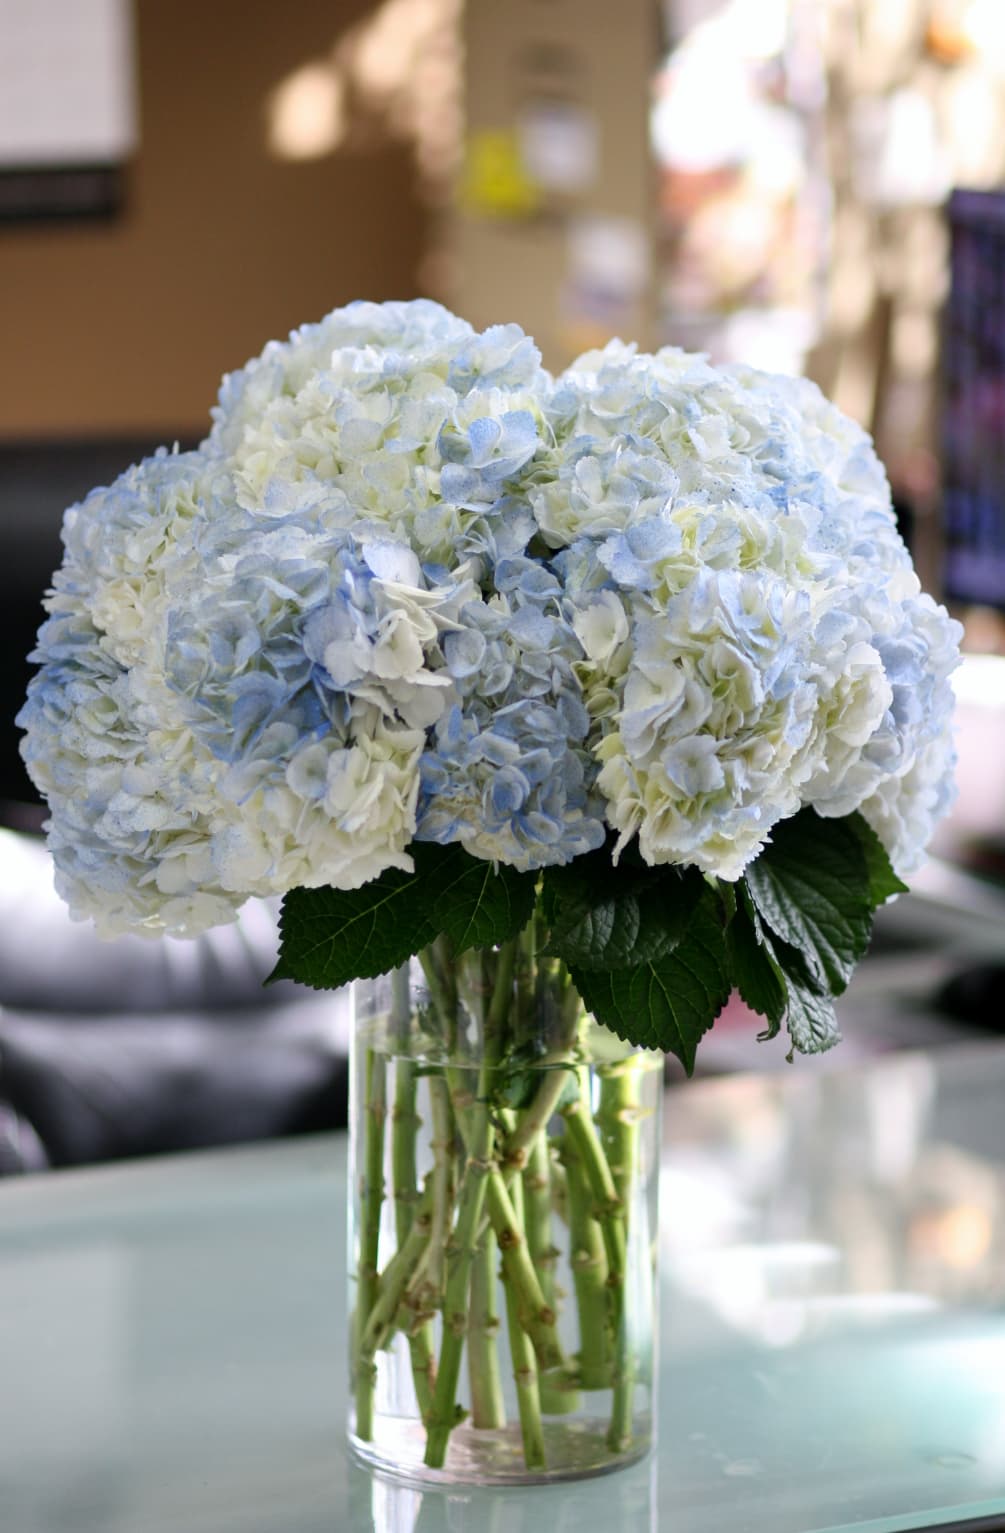 Something cool for home or office - vase of hydrangeas
 